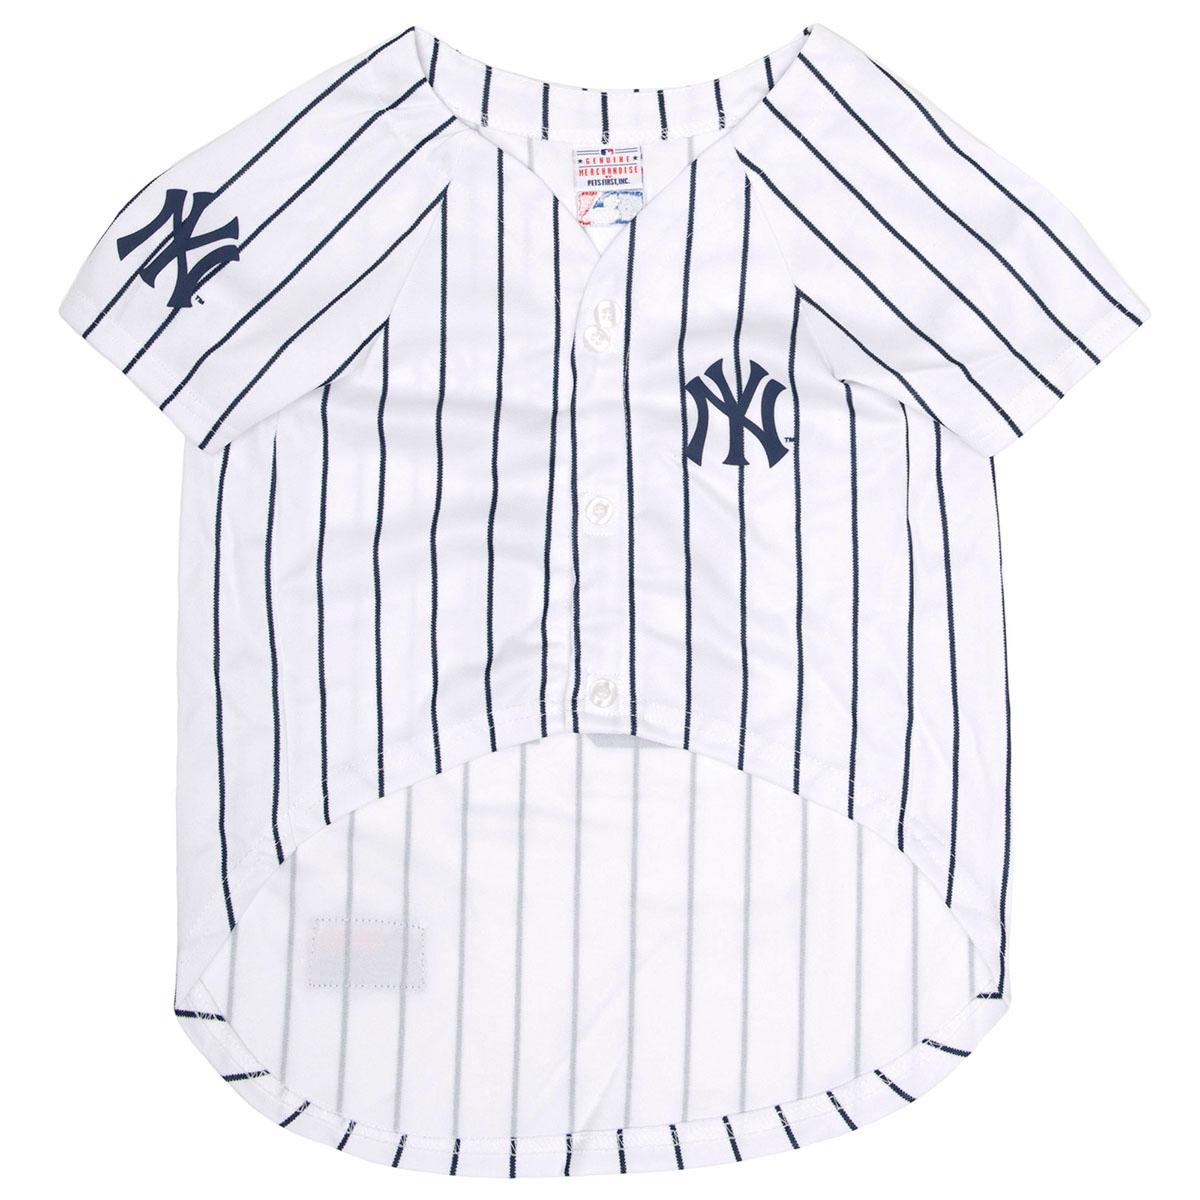 GIANCARLO STANTON #27 Yankees MLBPA Officially Licensed Pinstripe Dog Jersey